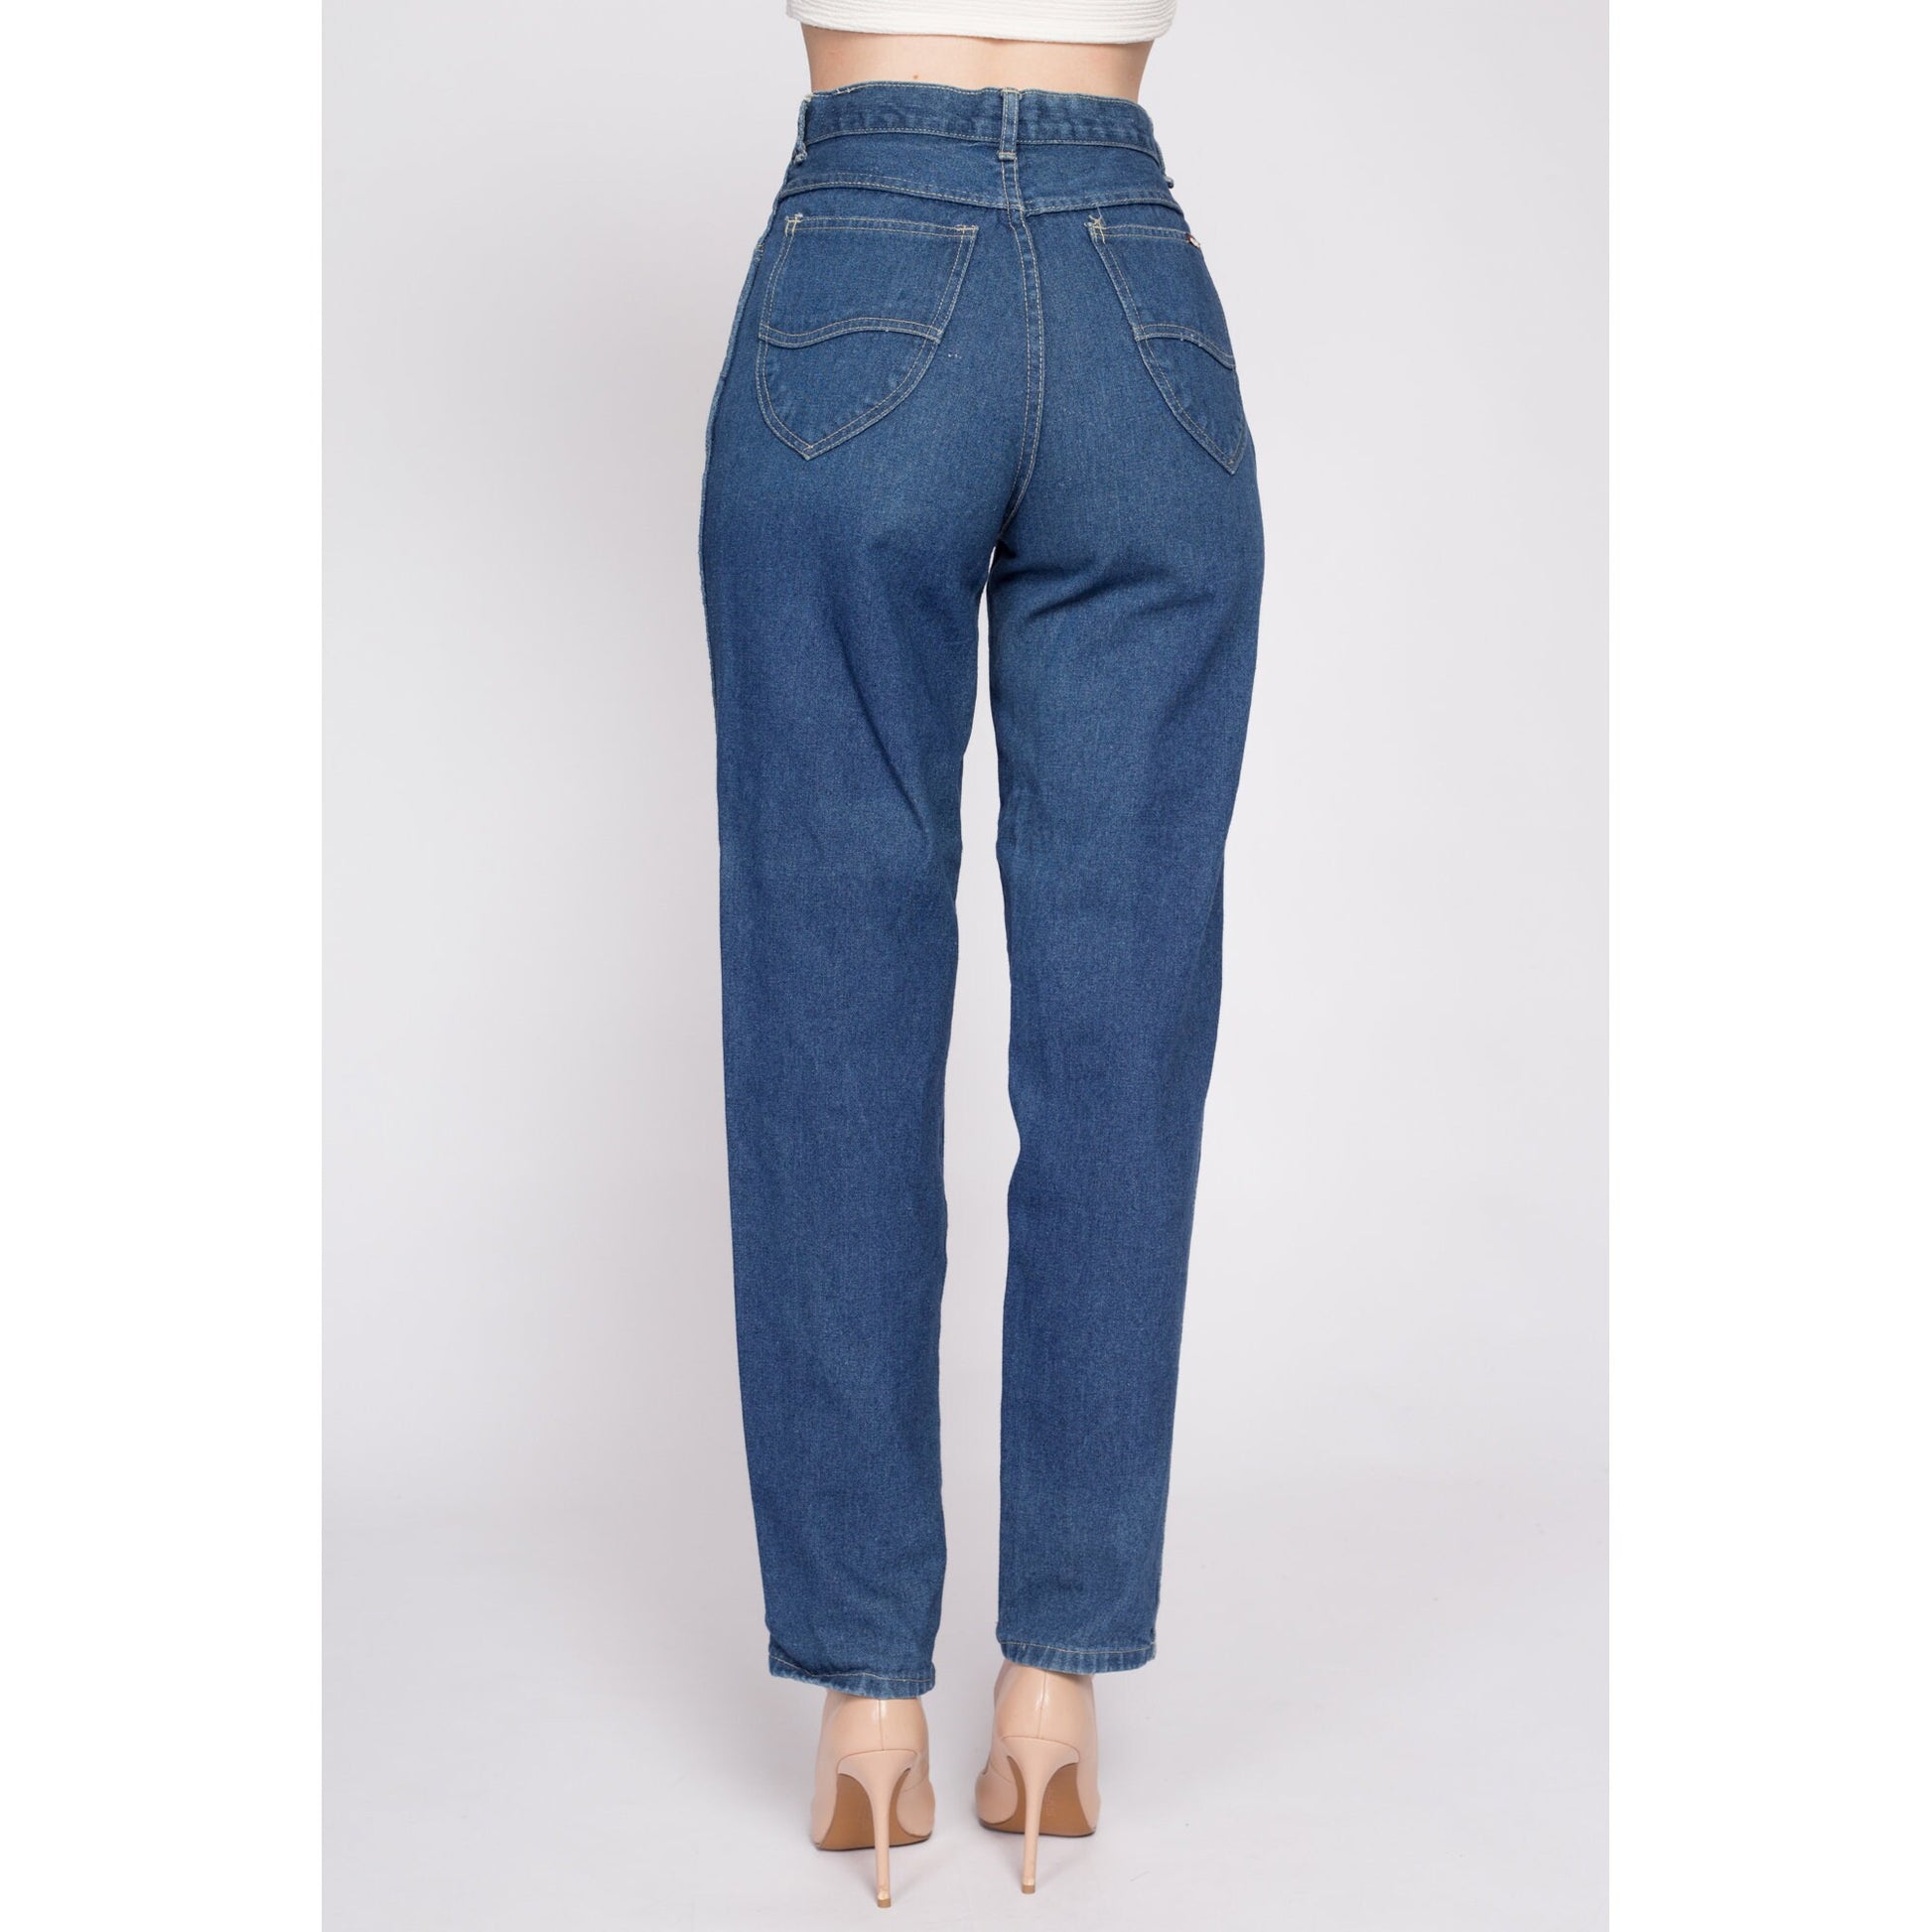 80s High Waisted Mom Jeans - Small, 26" | Vintage Dark Wash Denim Tapered Leg Jeans